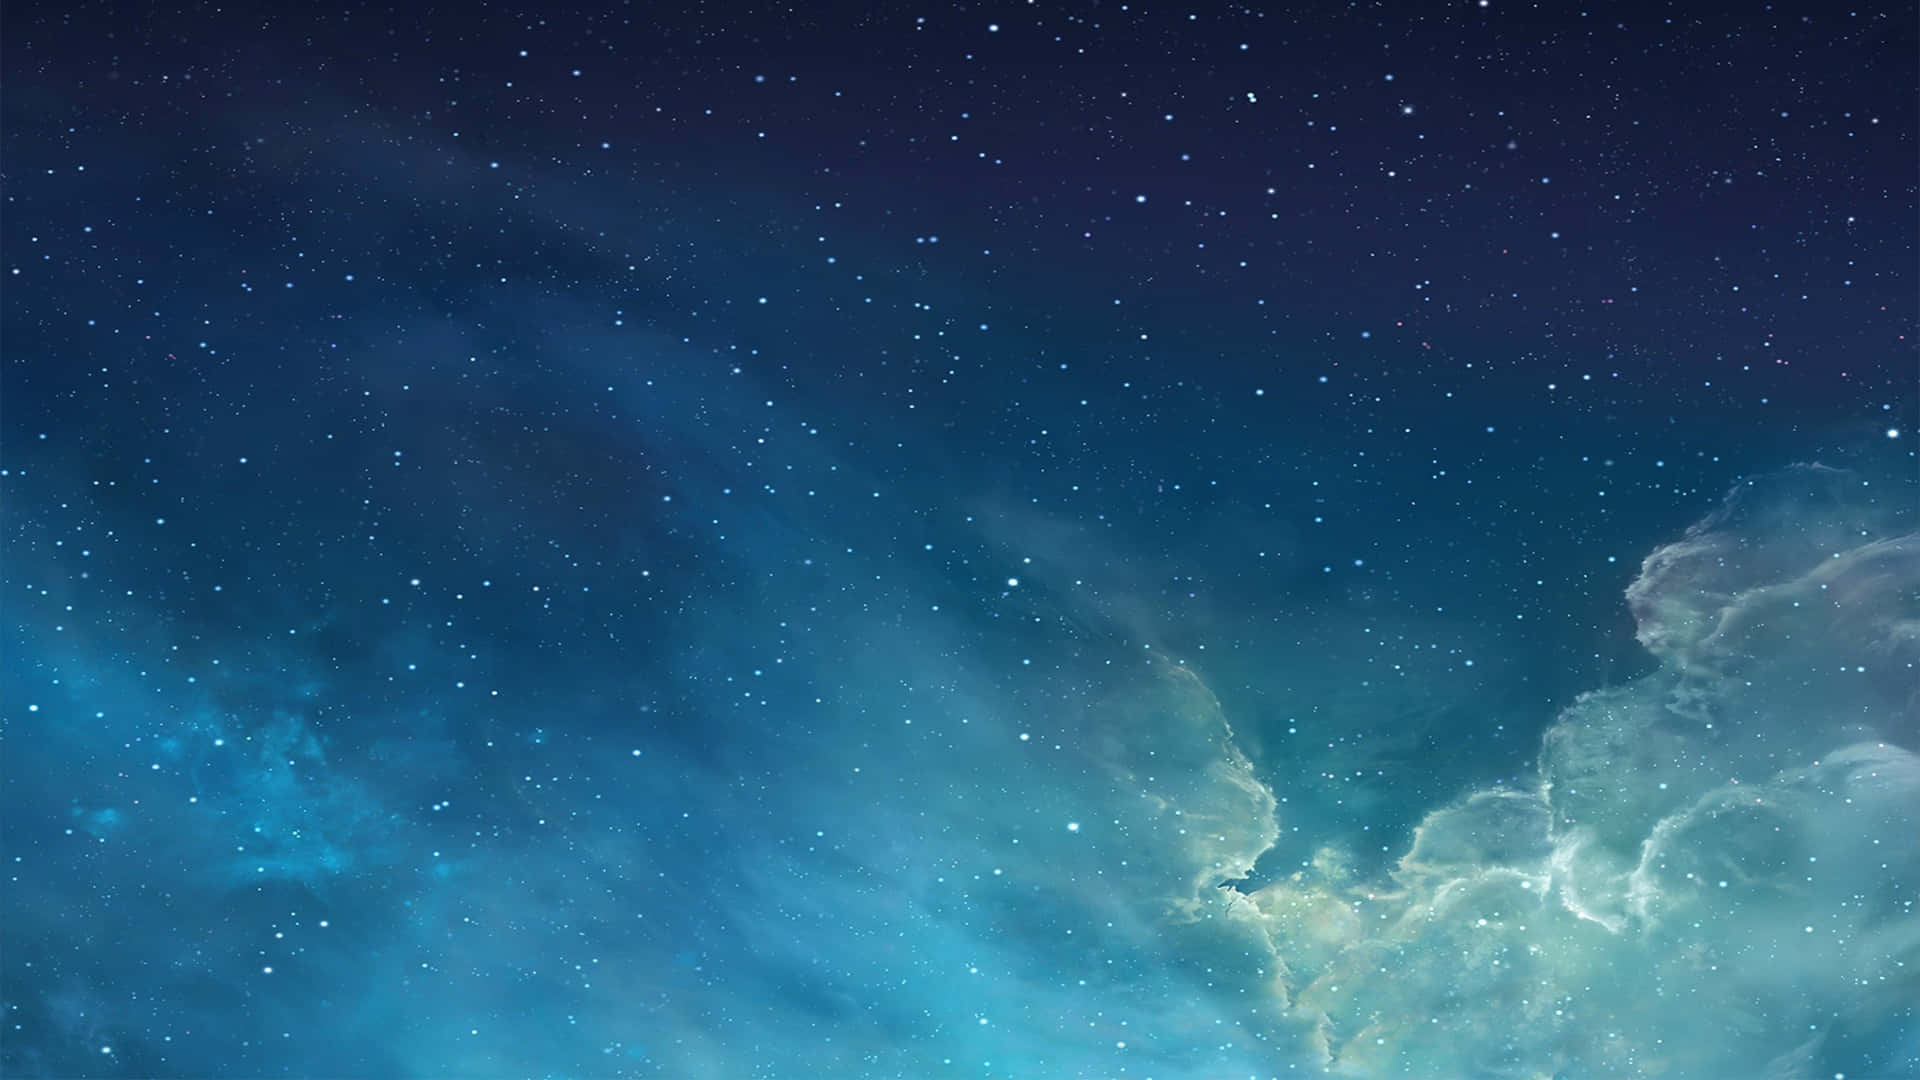 An Image Of An Iphone With A Blue Sky And Stars Wallpaper